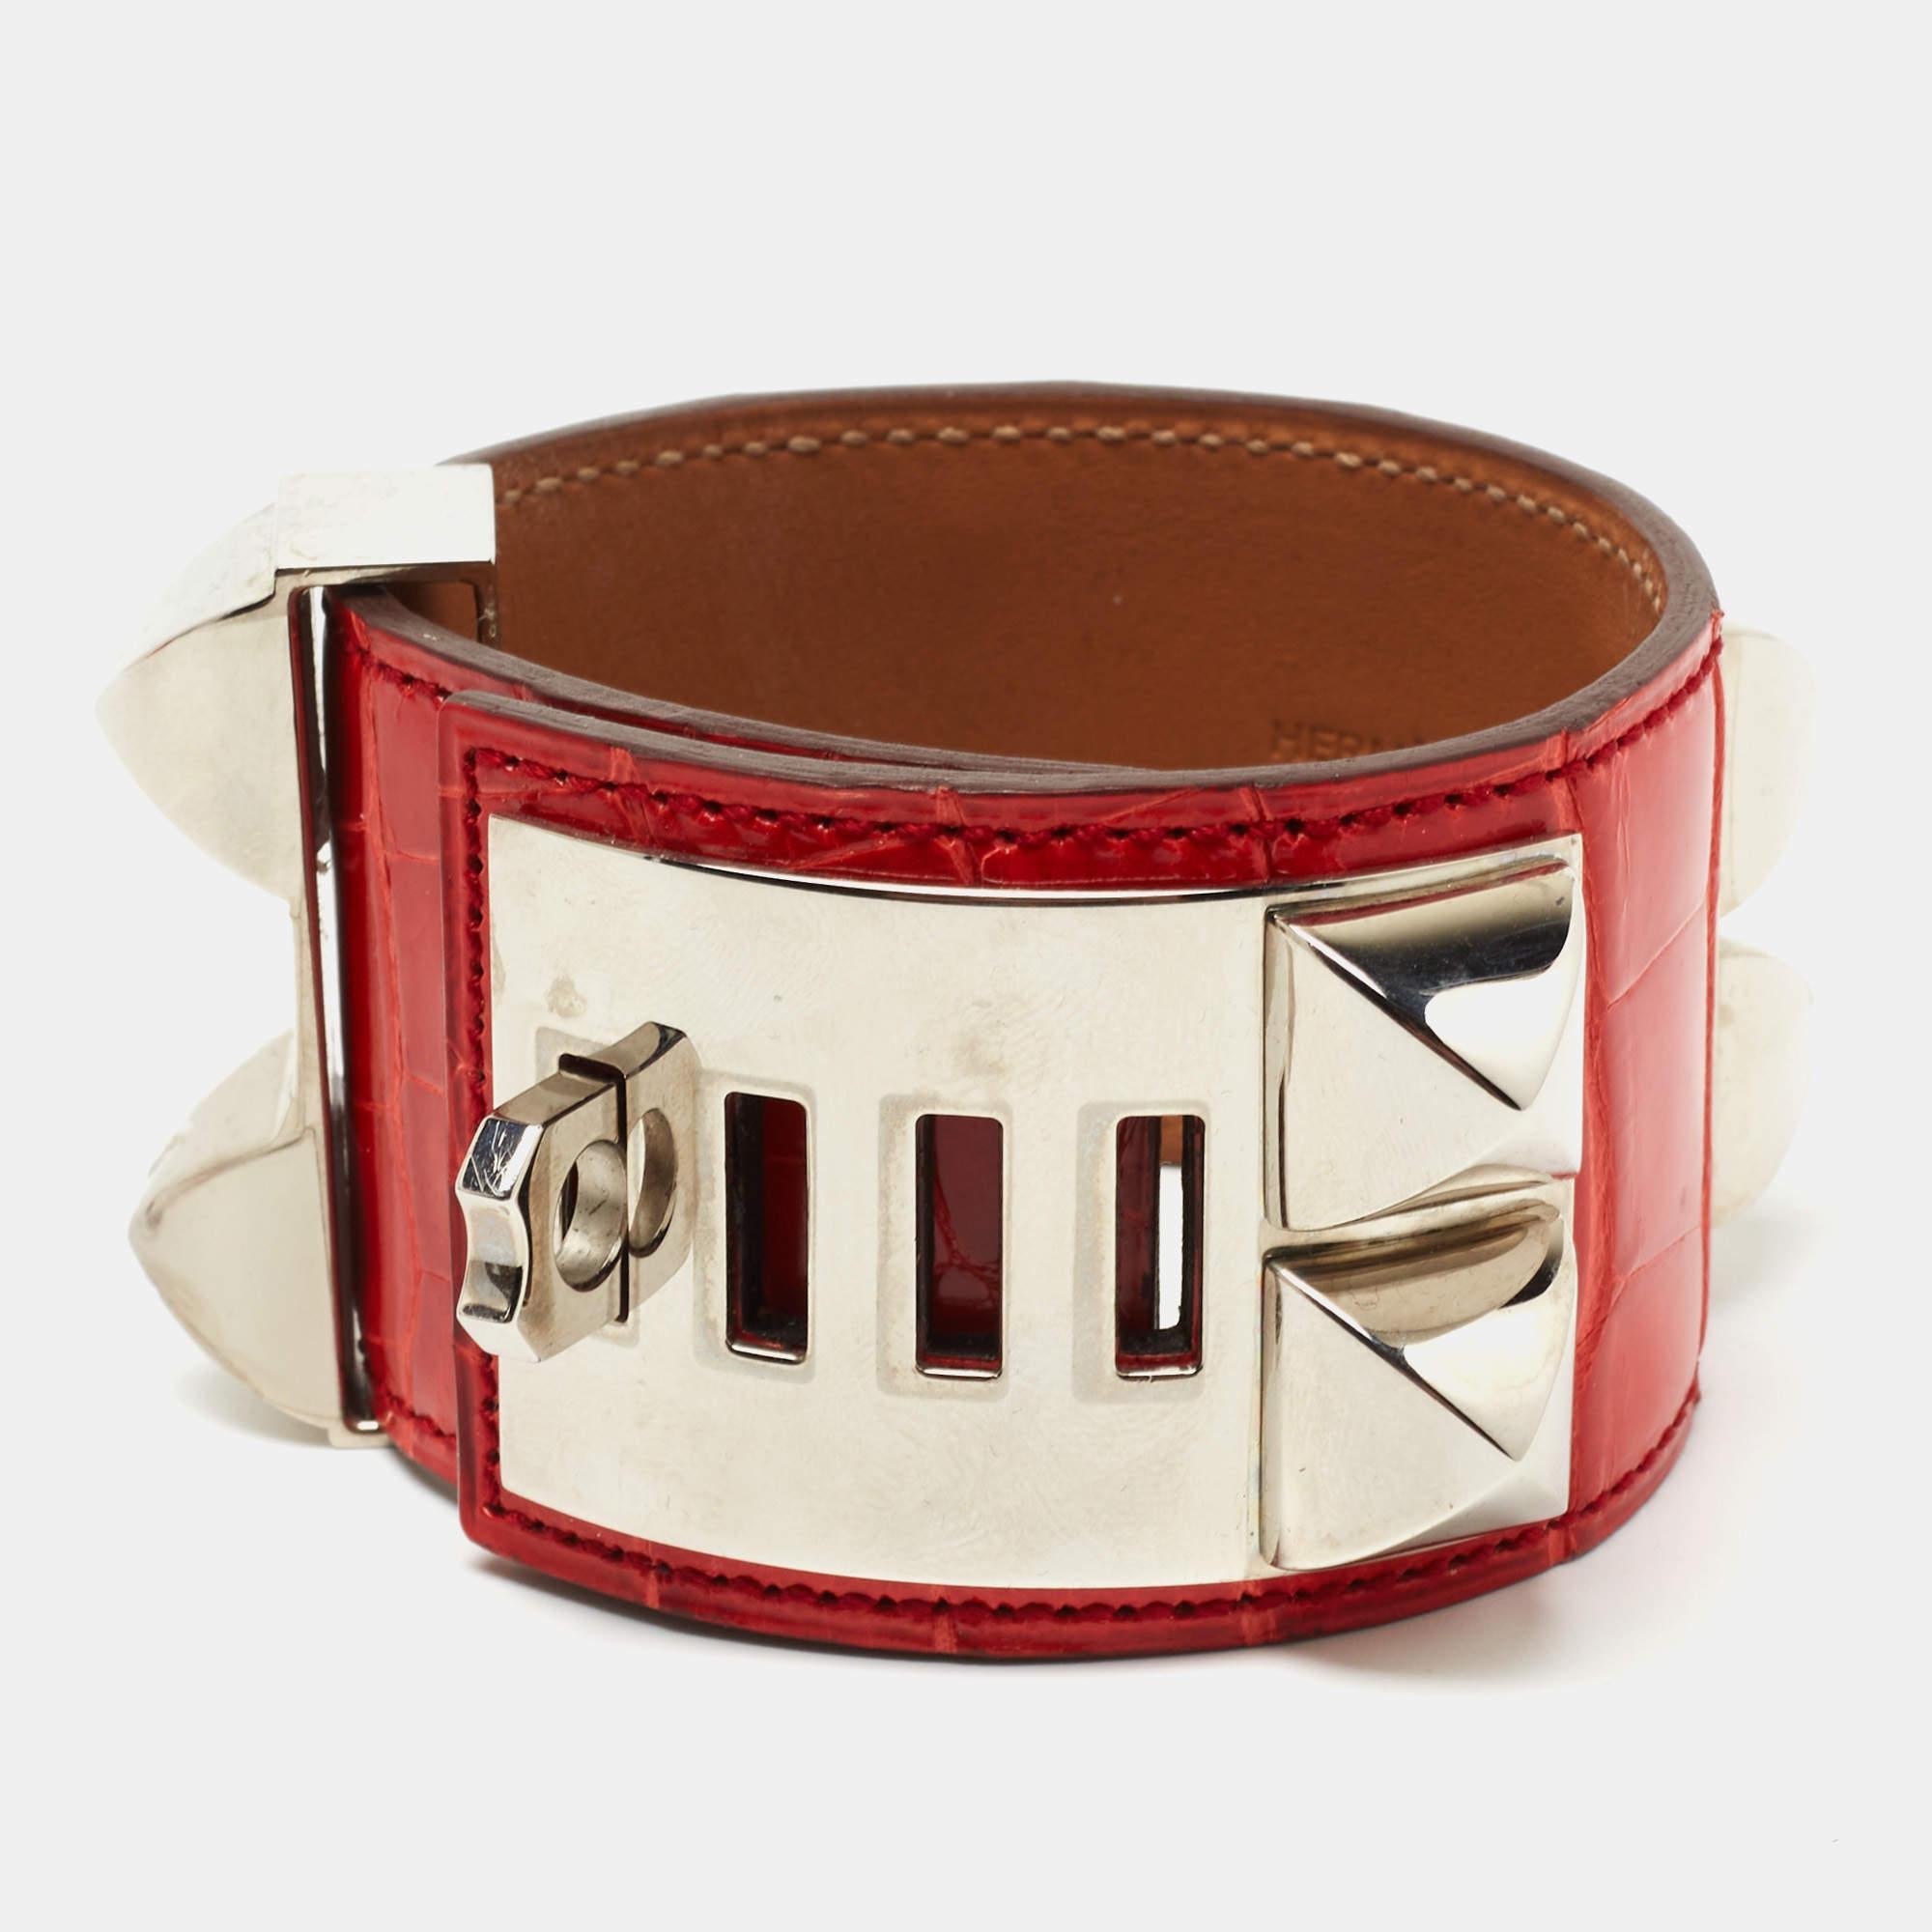 Accessorize classily and stylishly by wearing this bracelet from Hermès. Crafted using red Crocodile leather, this Collier De Chien bracelet is highlighted with Palladium Plated metal. The perfect accessory to amp up your attire.

Includes: Original